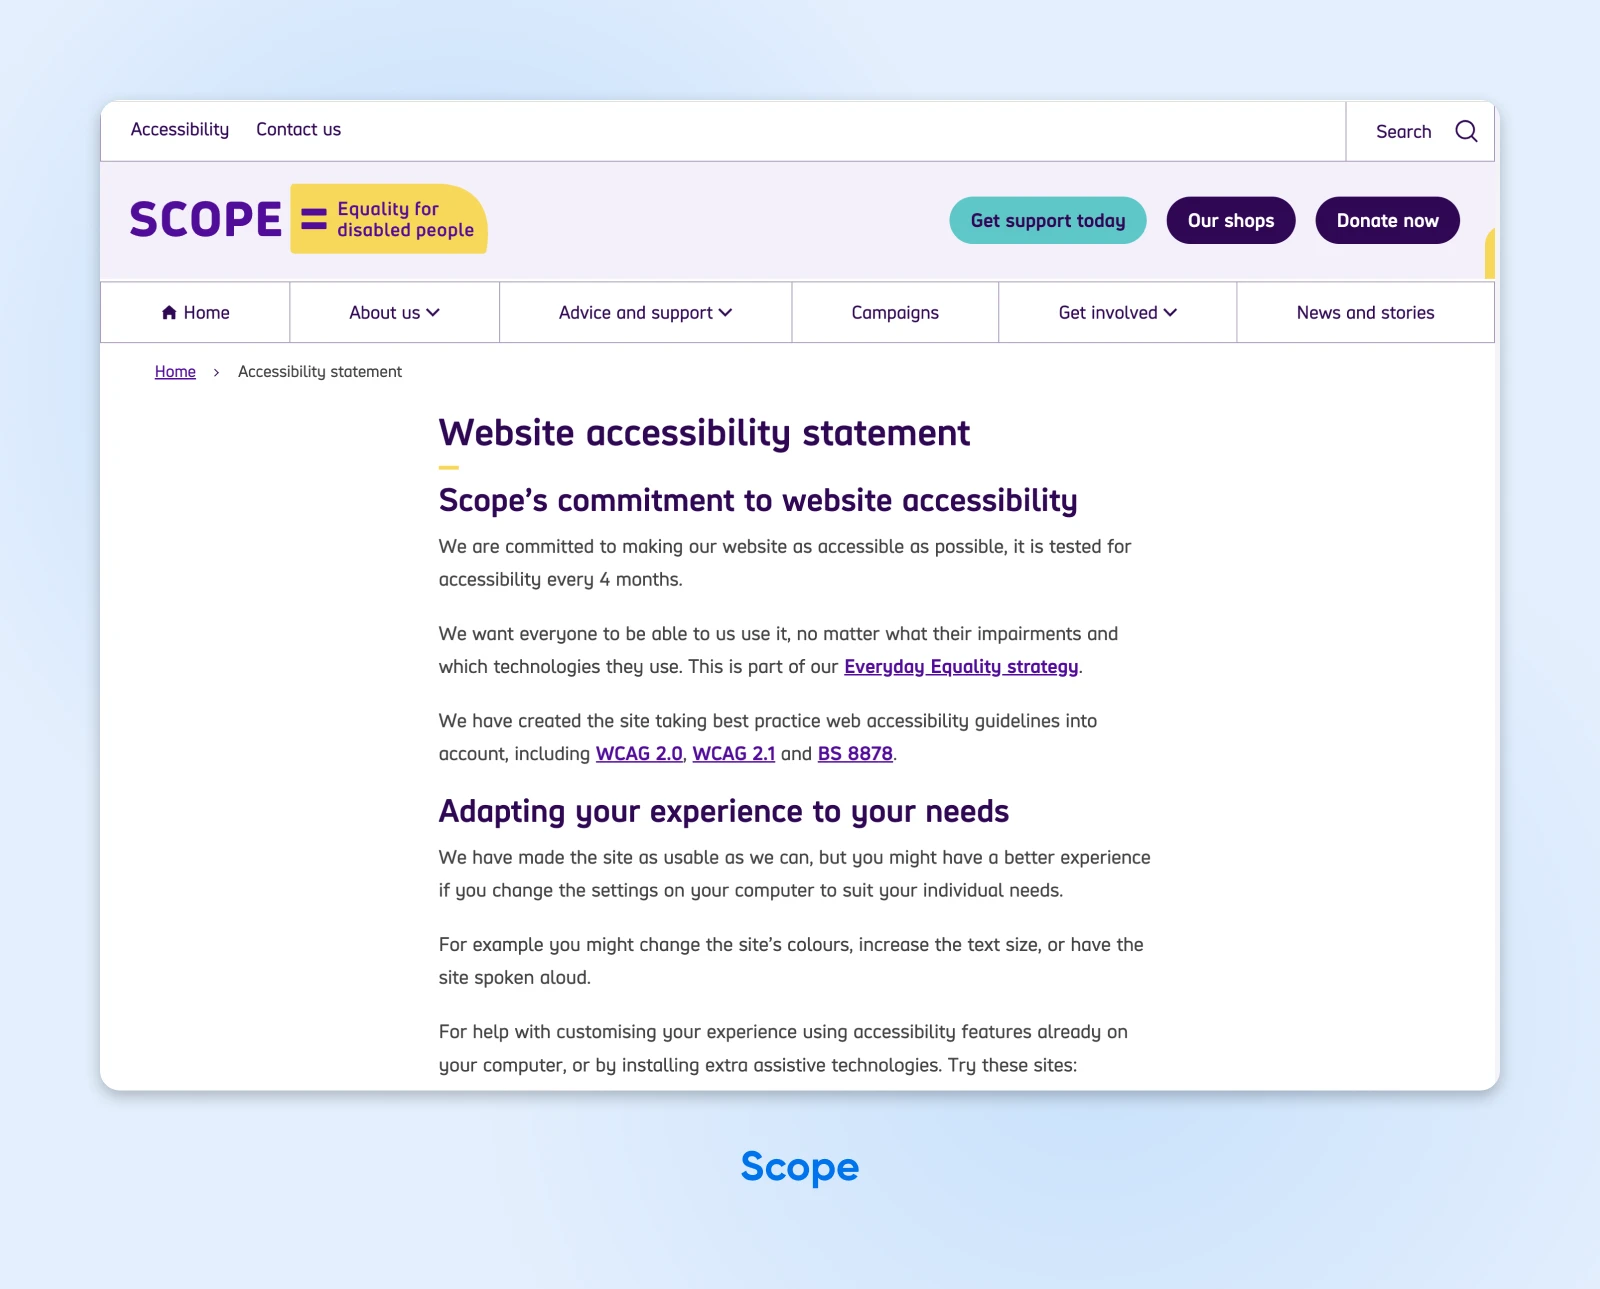 Scope's Accessibility statement page outlining its commitments and adapting the experience to users' needs.